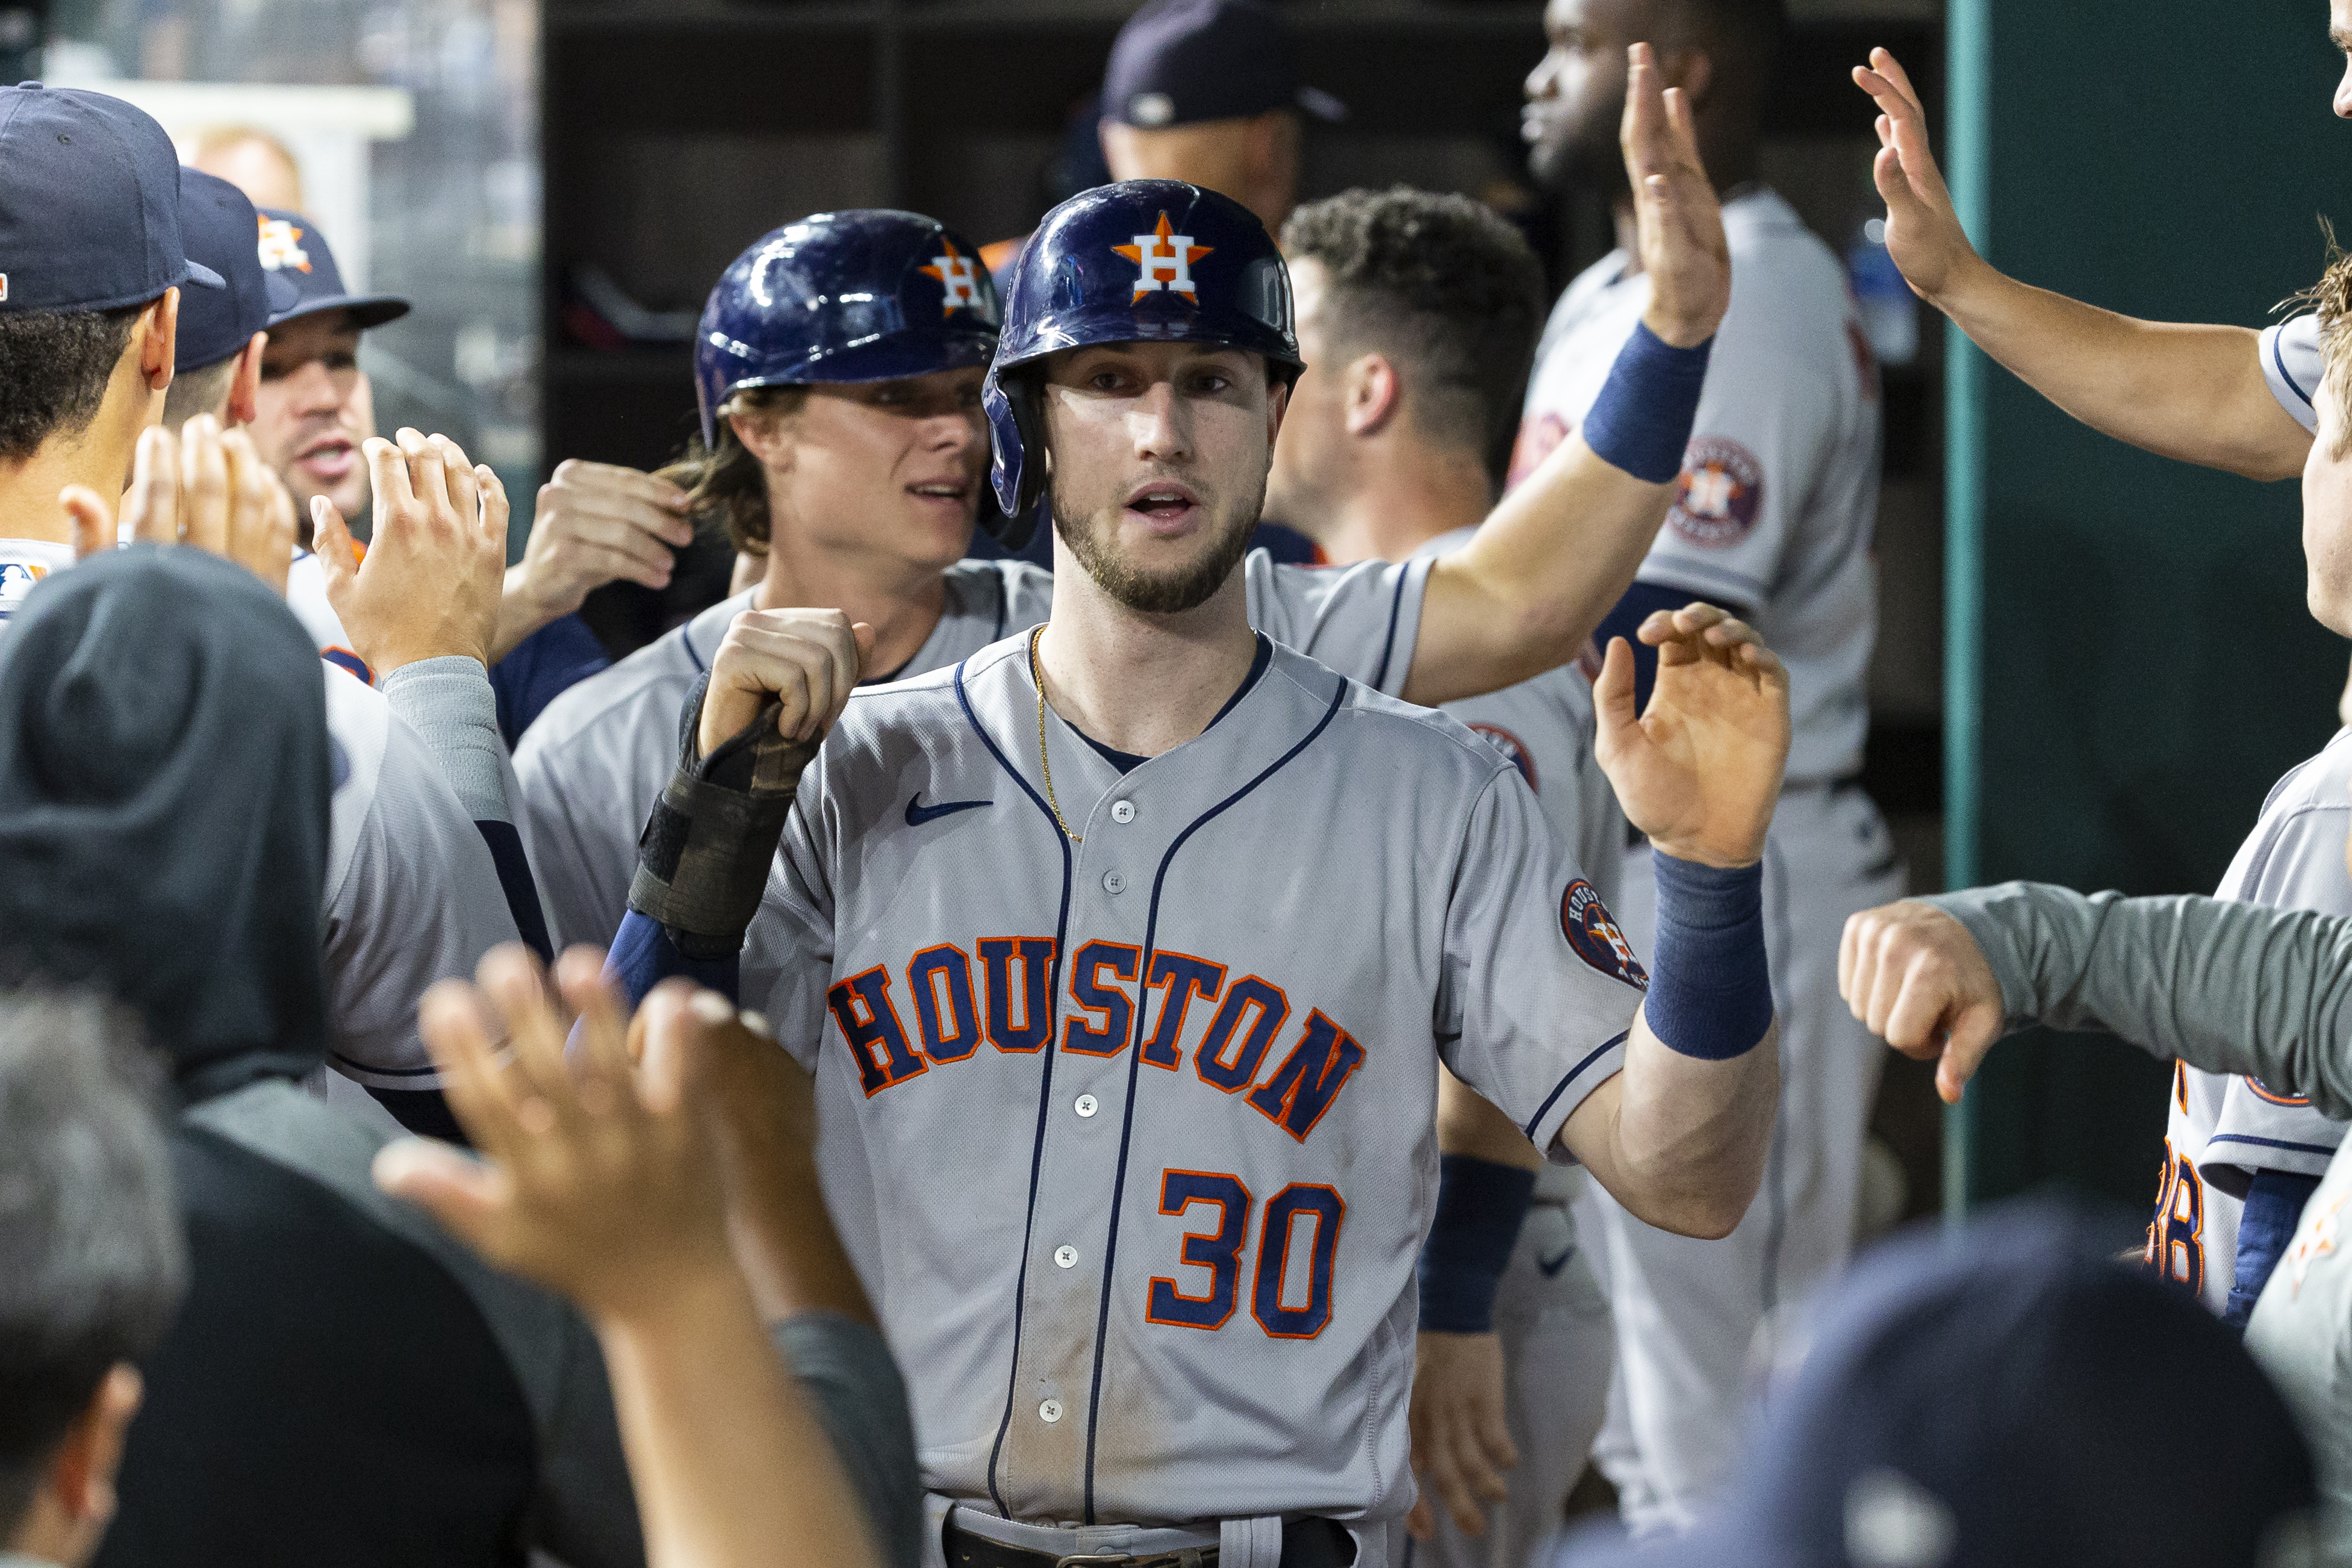 Correa hits RBI double in 10th, Astros rally past M's 5-4